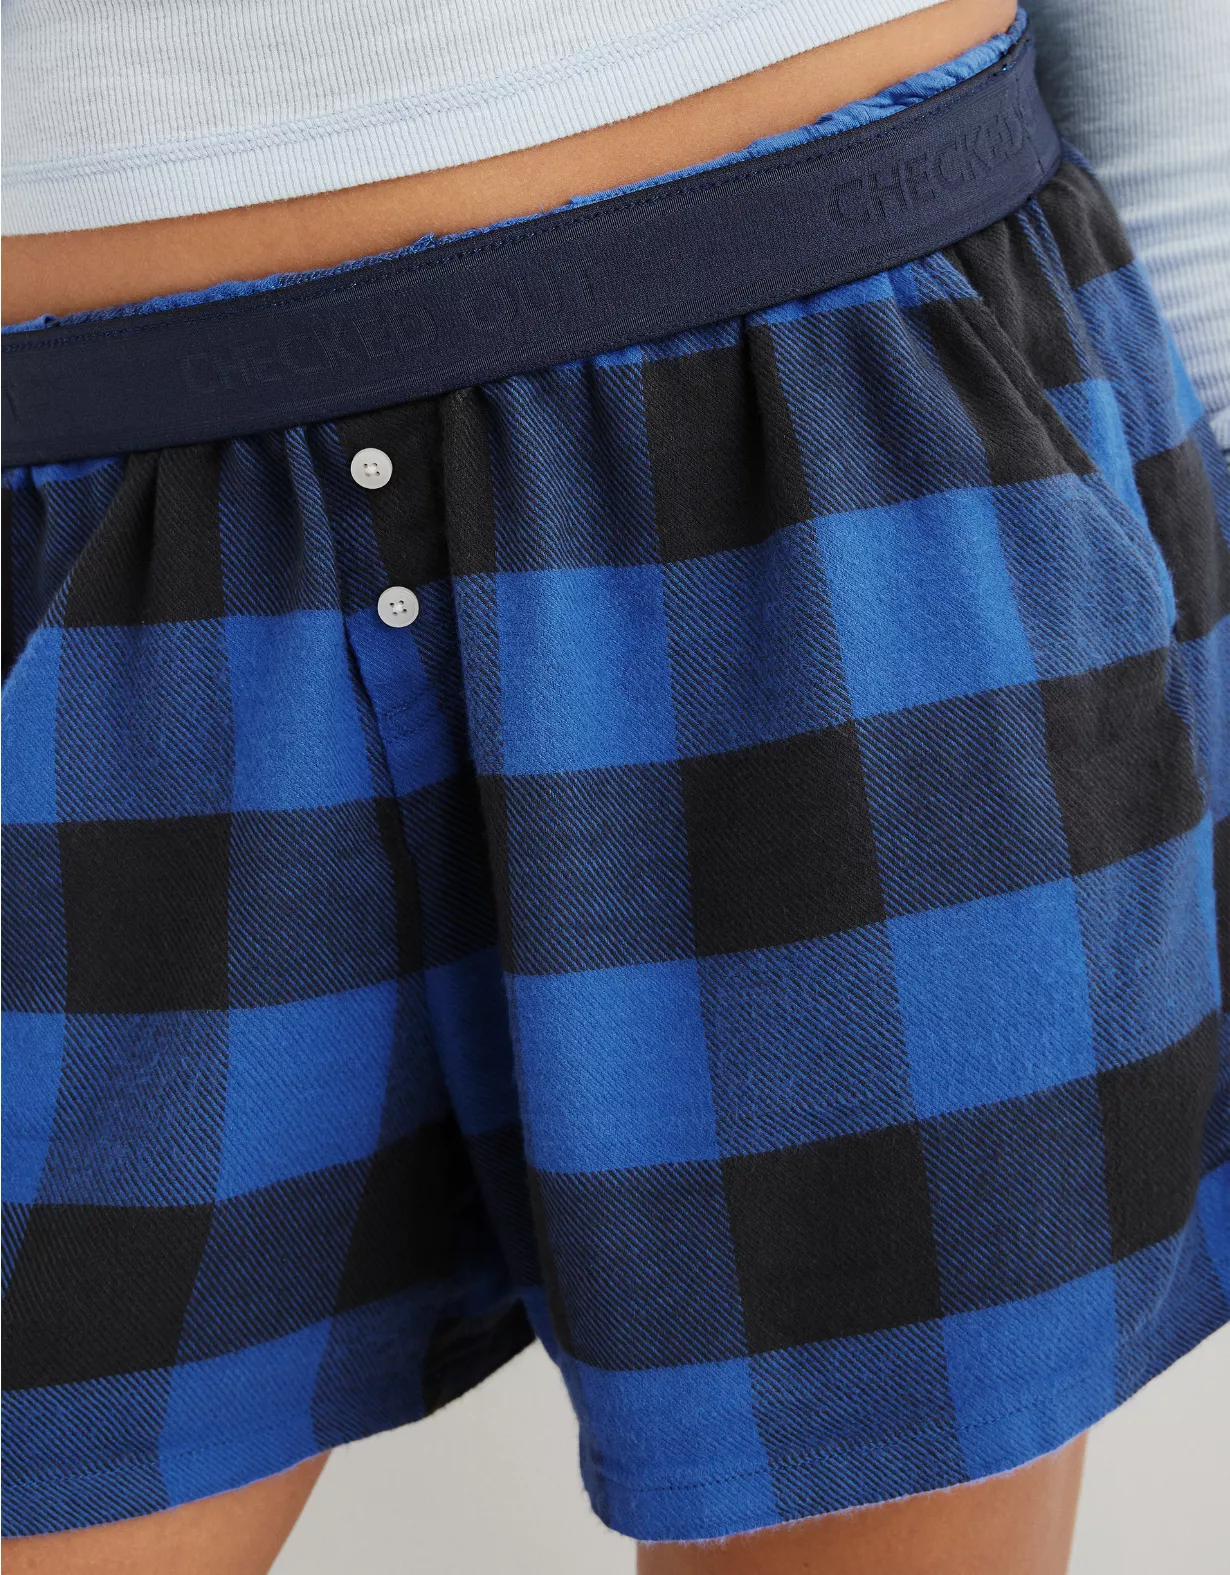 Aerie Flannel High Waisted Skater Pajama Boxer